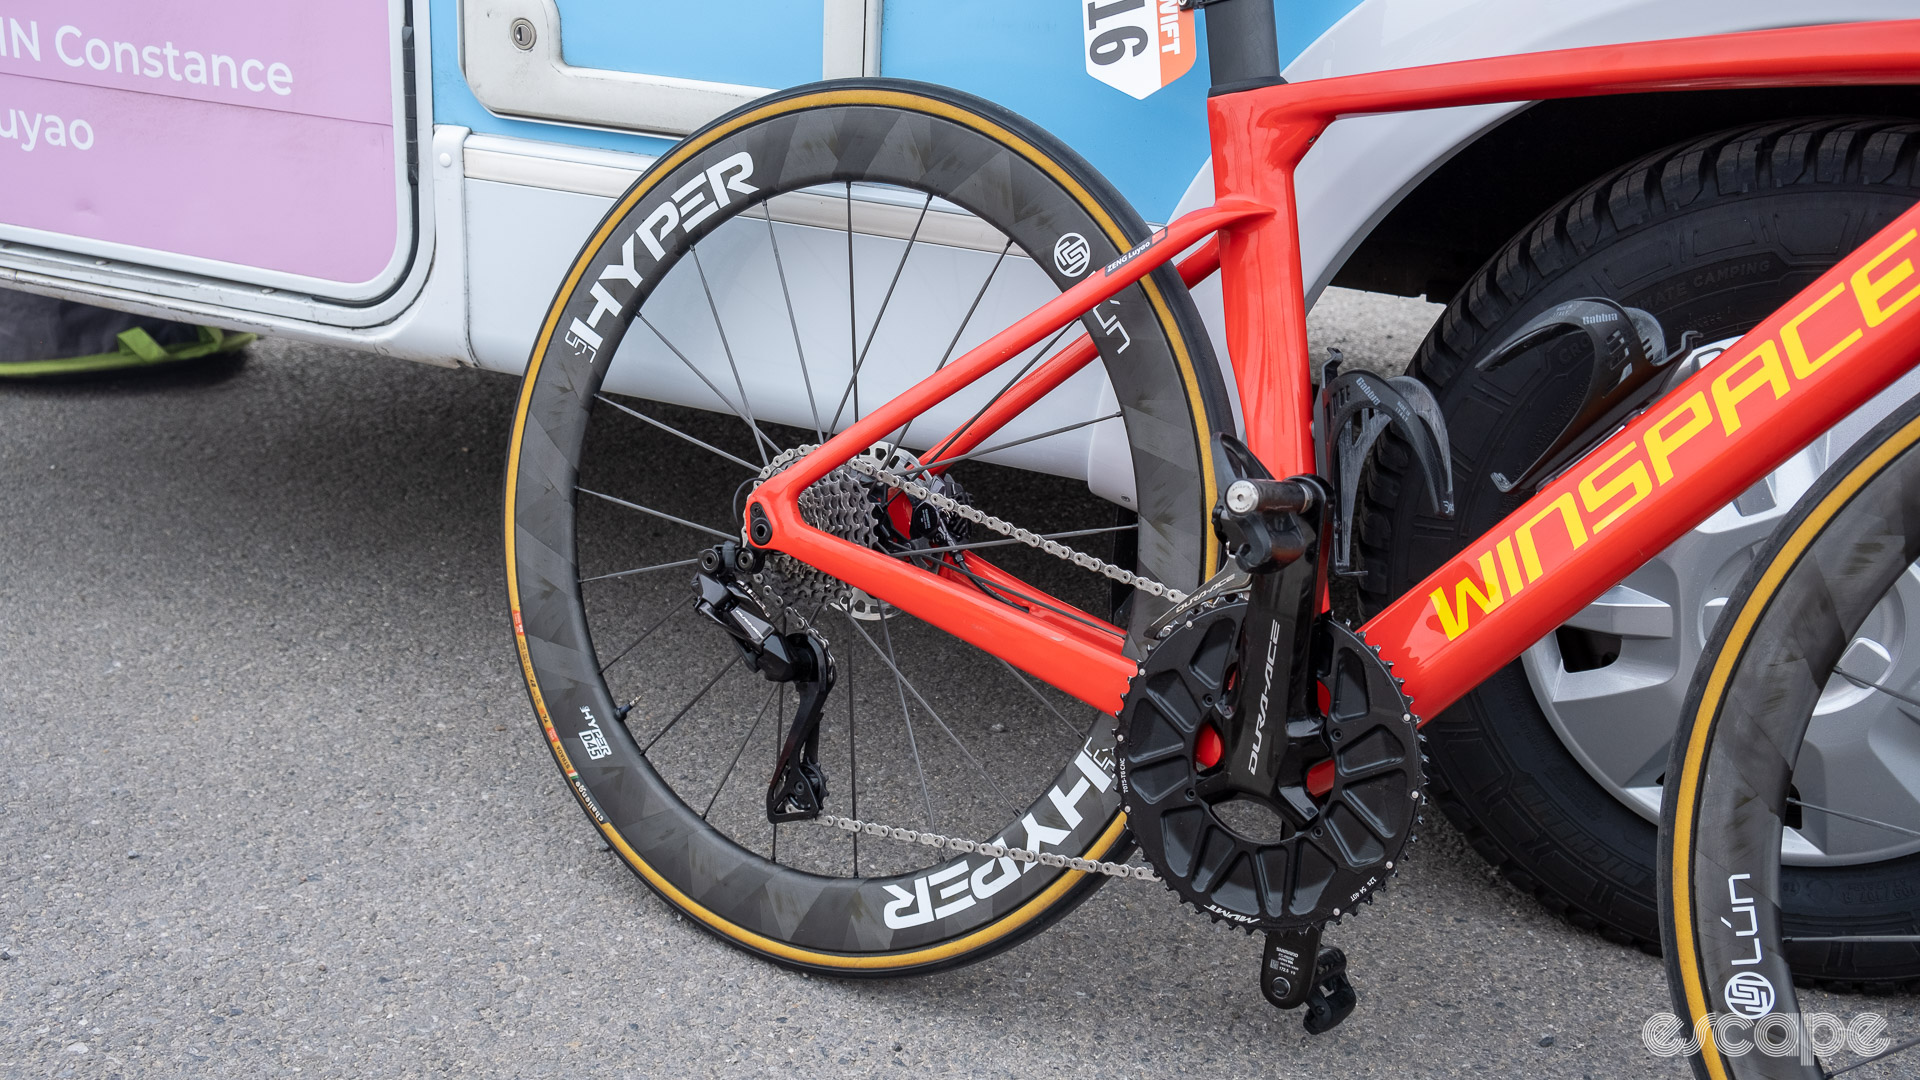 The photo shows the rear wheel on Luyao Zeng's Winspace T1550.